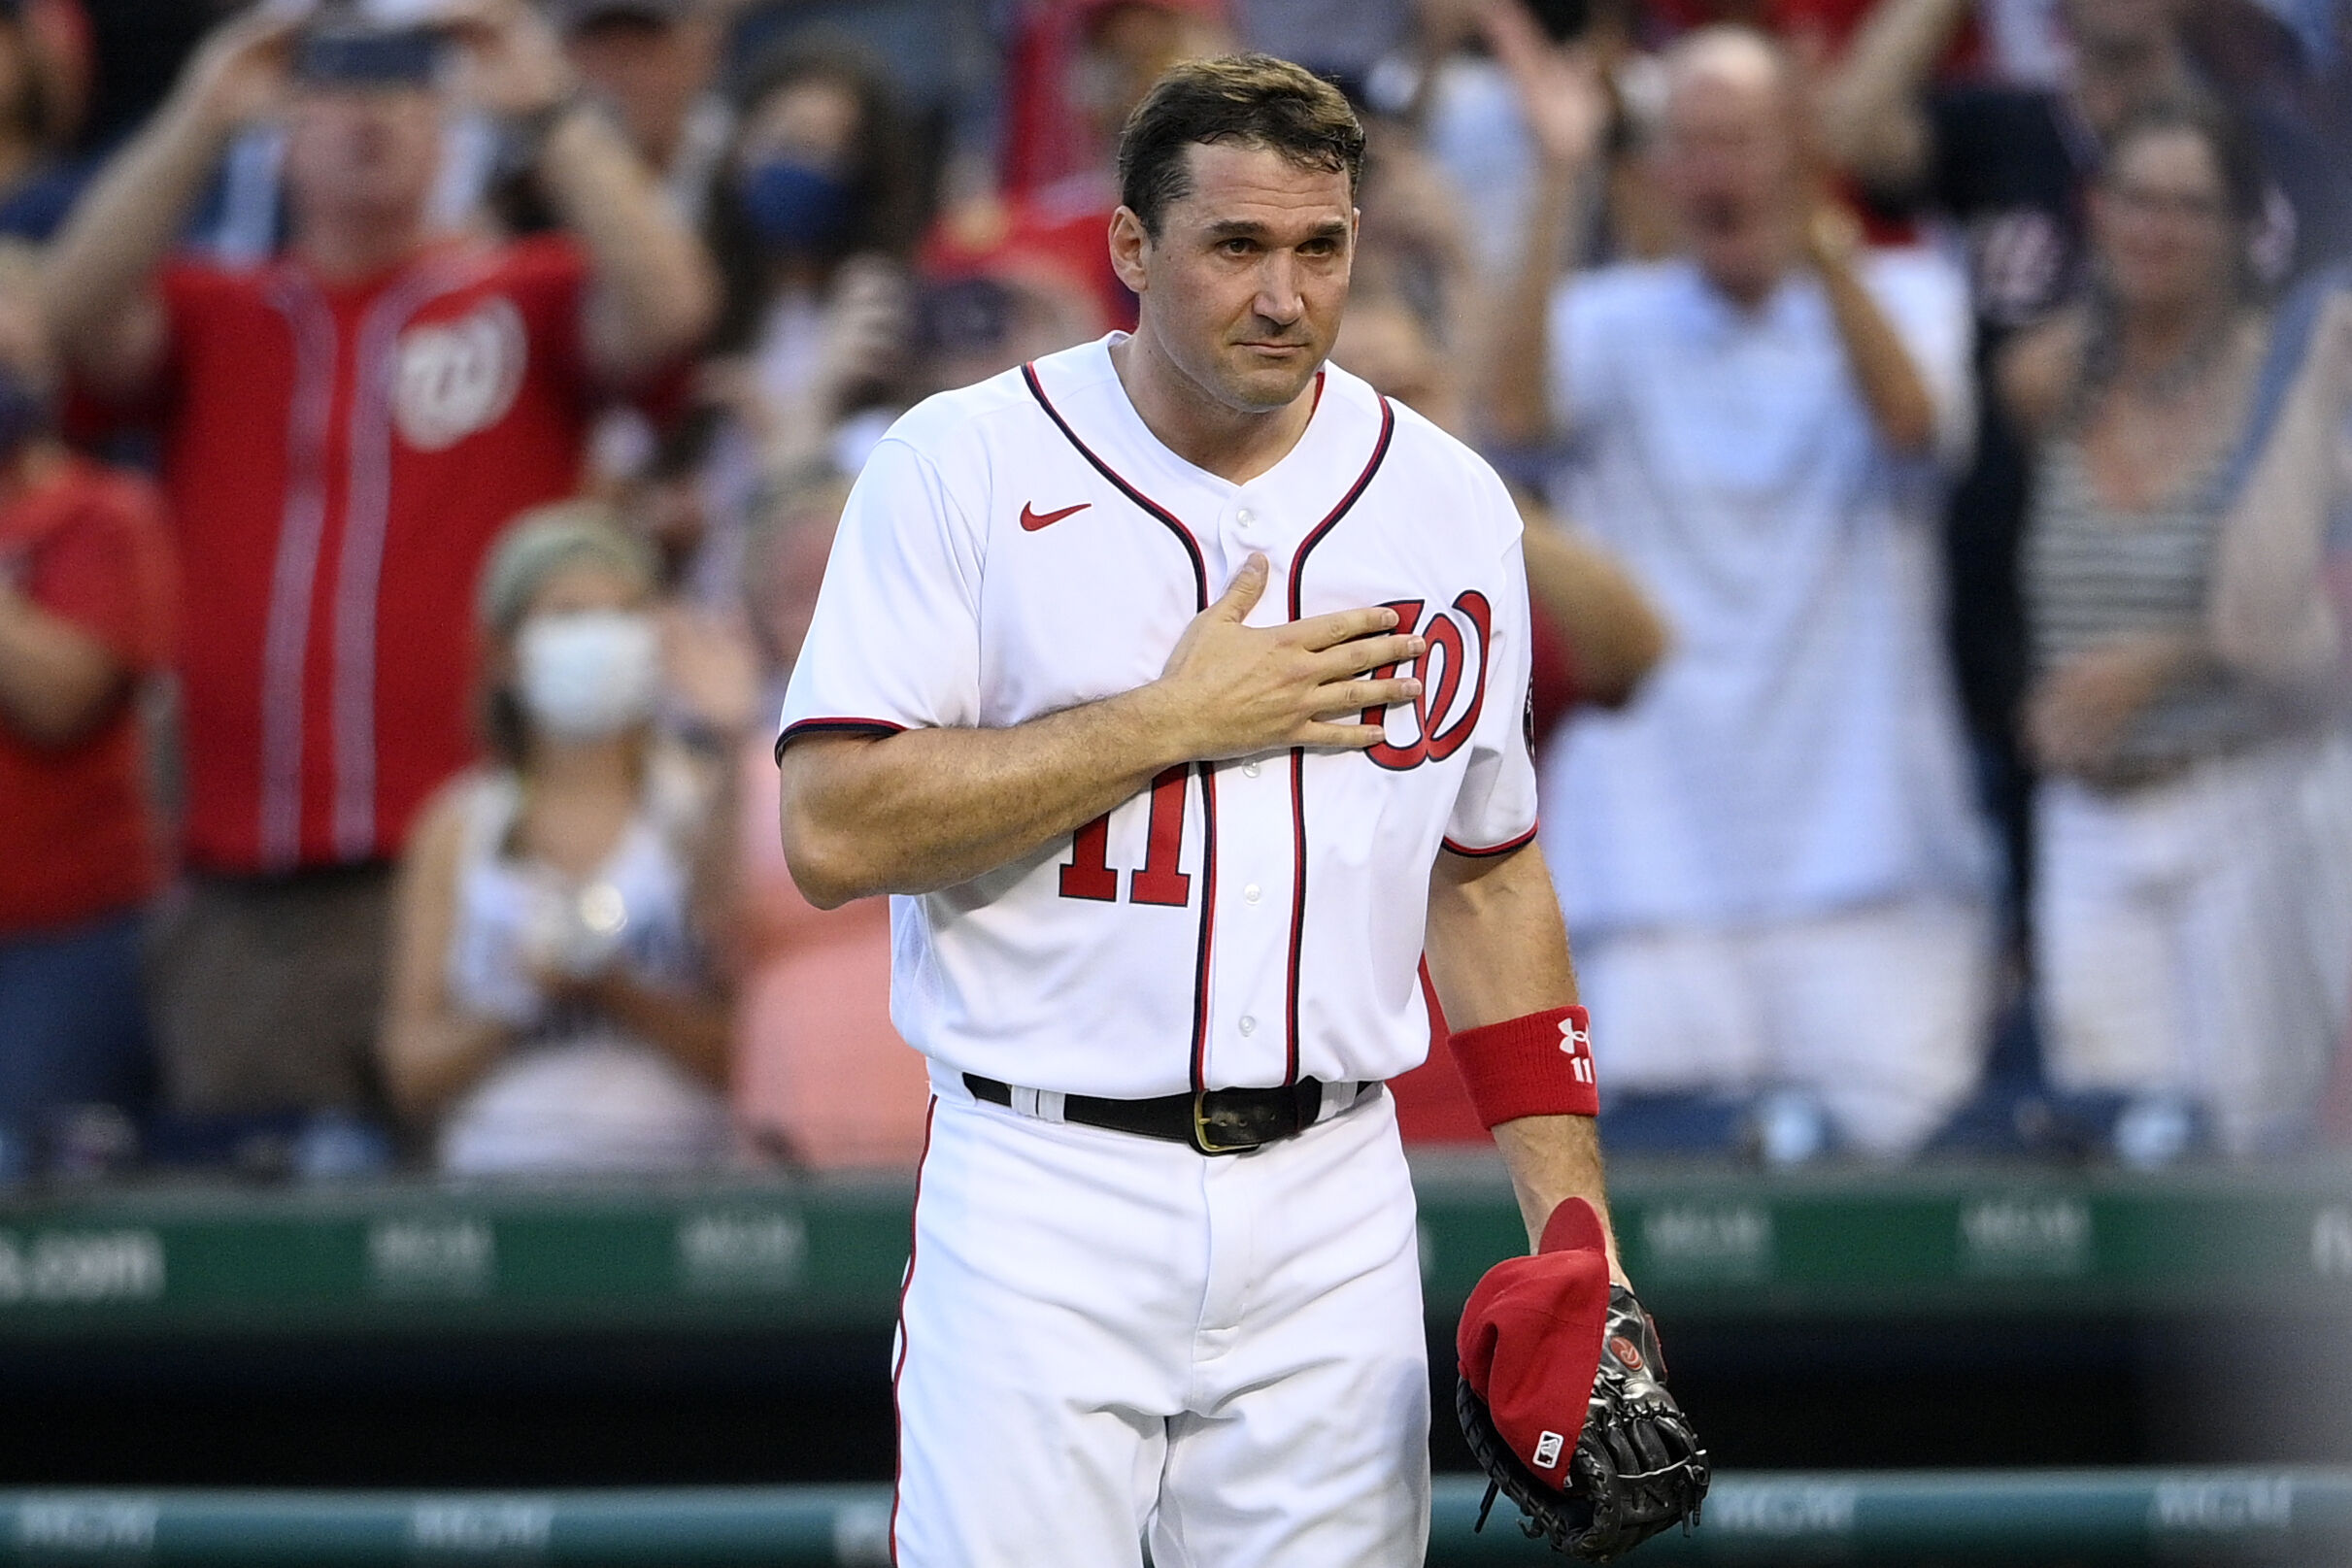 Nats fans give Ryan Zimmerman ovations even as he still ponders